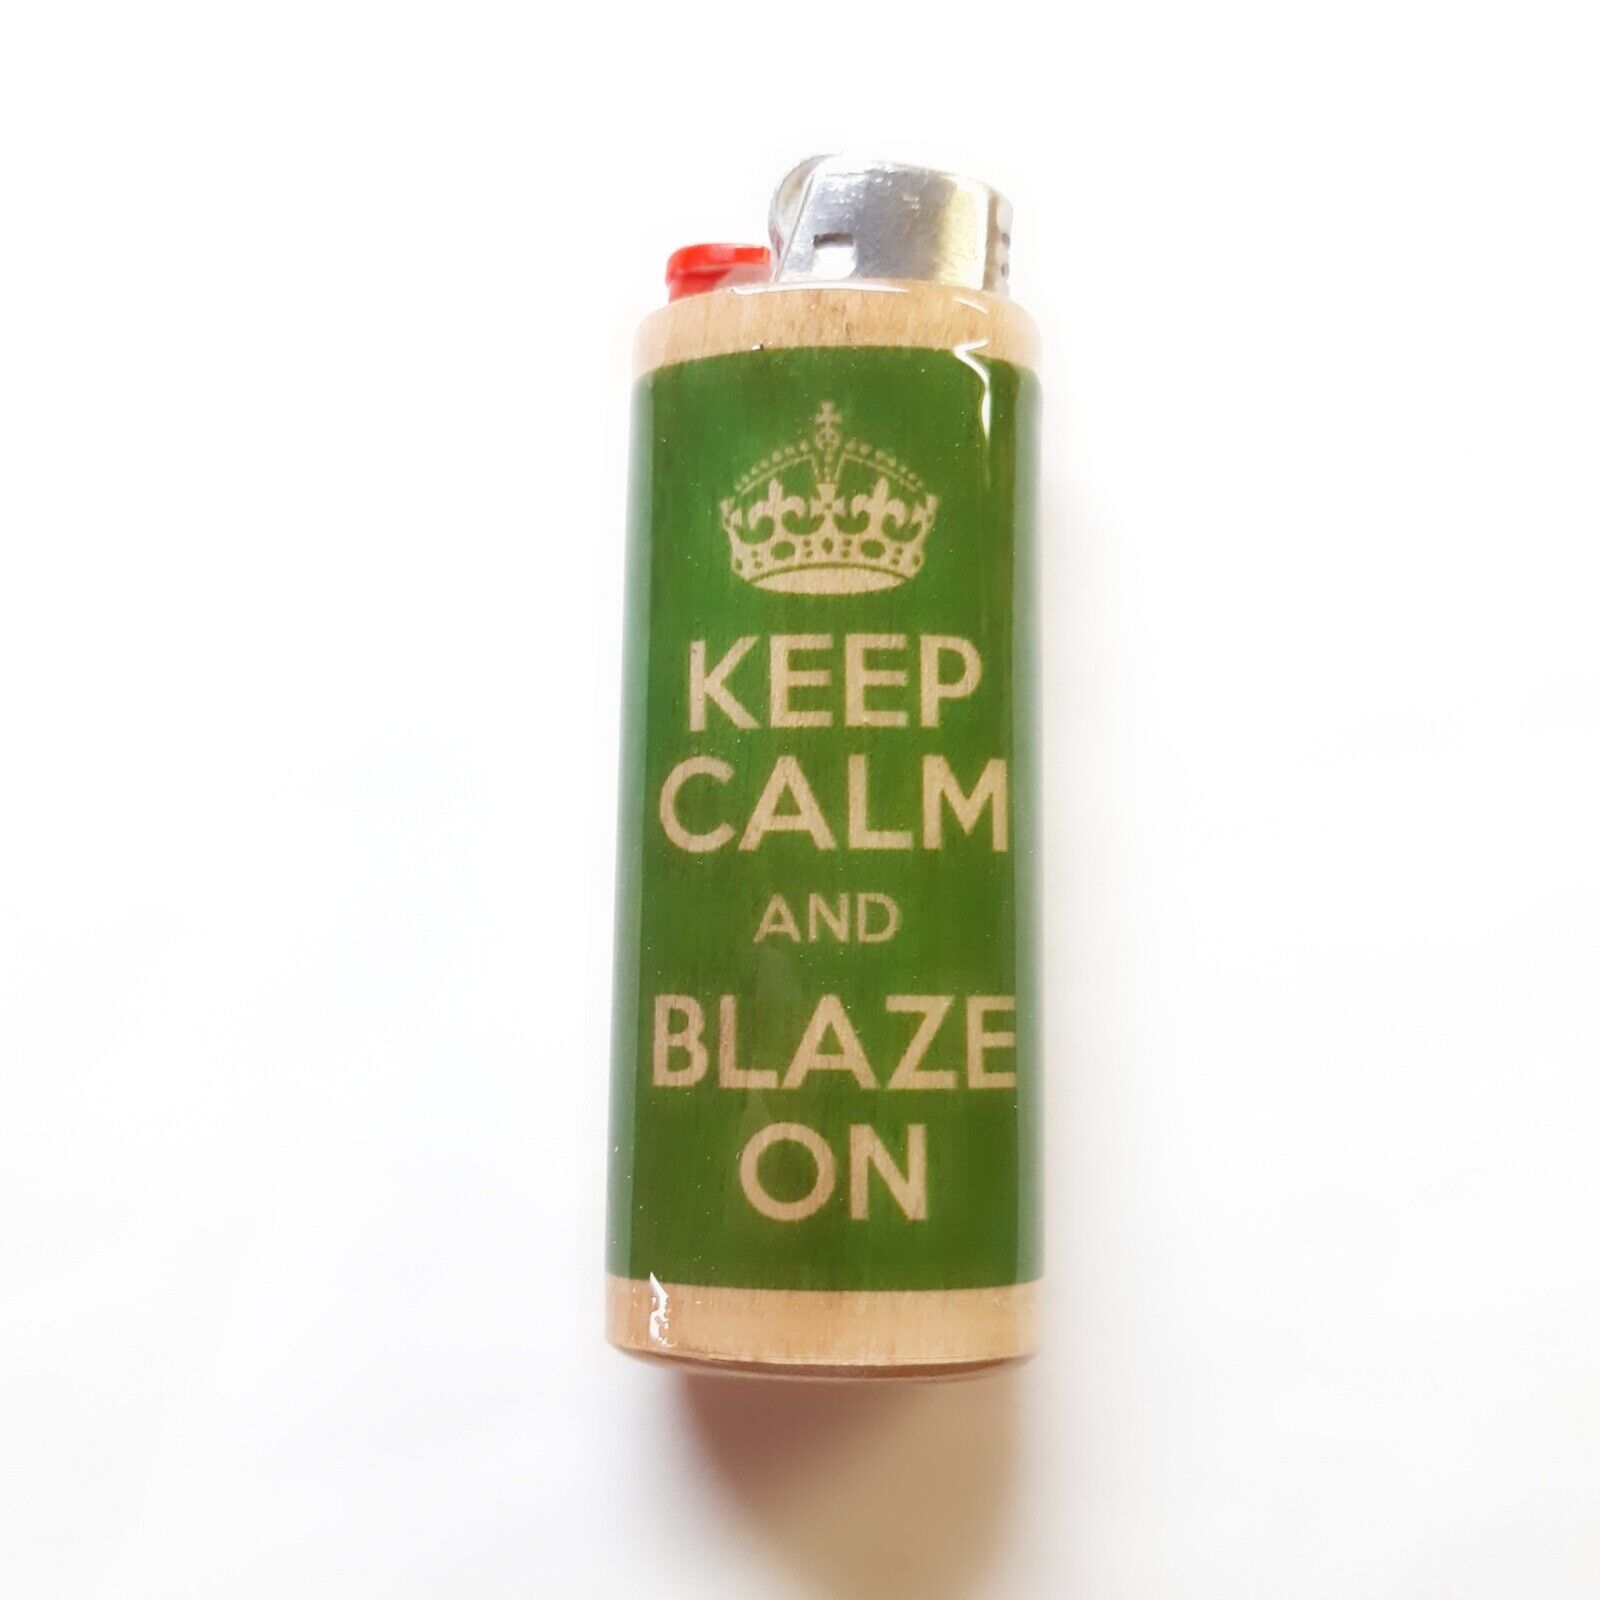 Keep Calm And Blaze On Lighter Case Holder Sleeve Cover Fits Bic Lighters